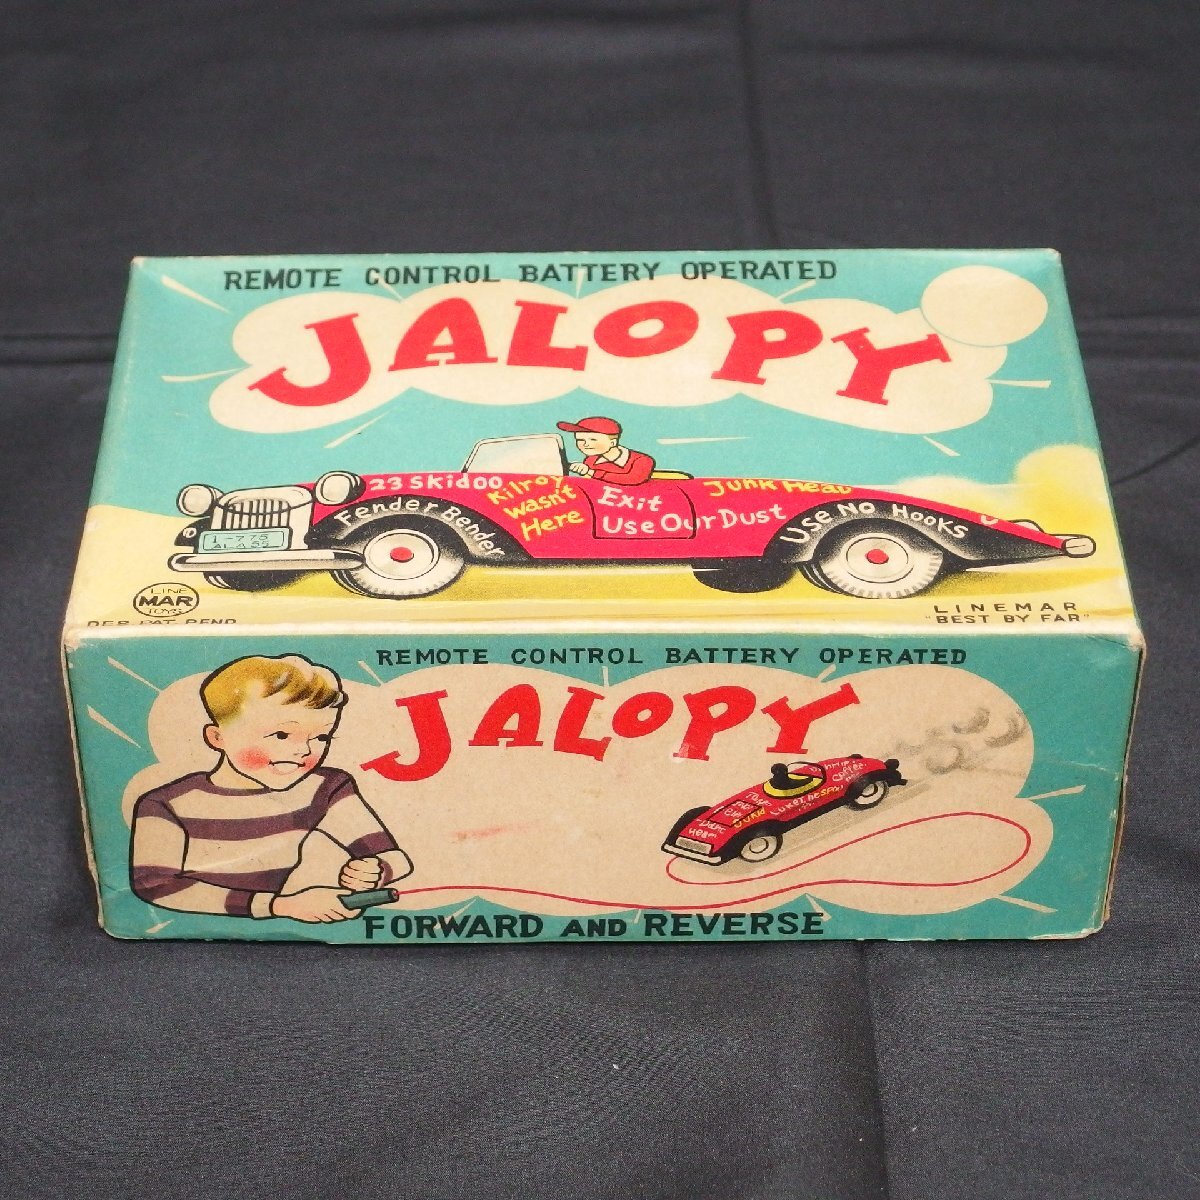 LINEMAR◆ラインマー製 1950年代 Remote Control Battery Operated JALOPY 元箱付き 完動品◆_画像2